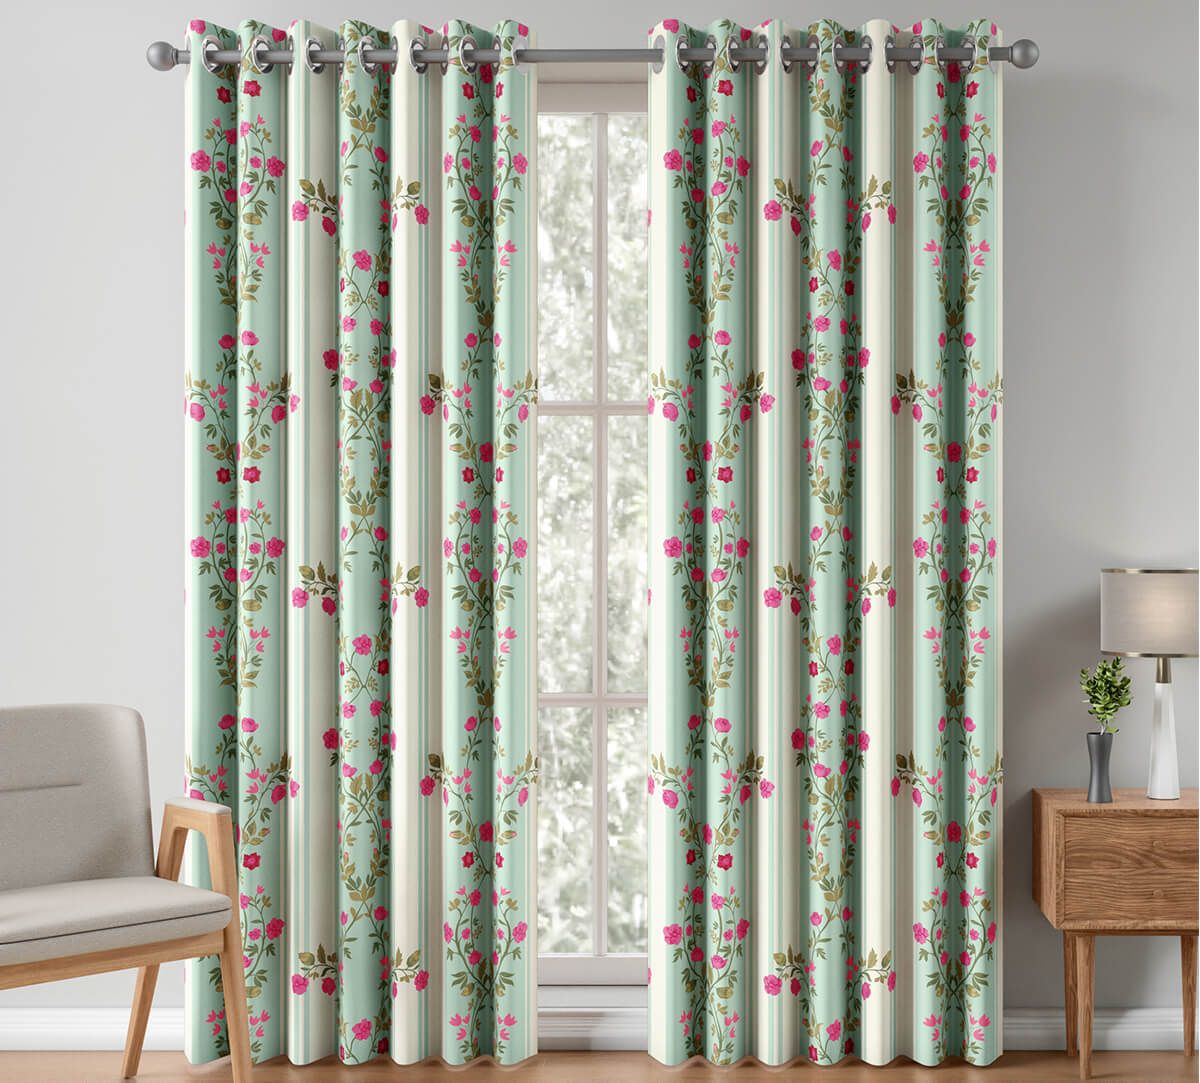 India Circus by krsnaa Mehta Pistacho Rose Twist Curtains Set of 2